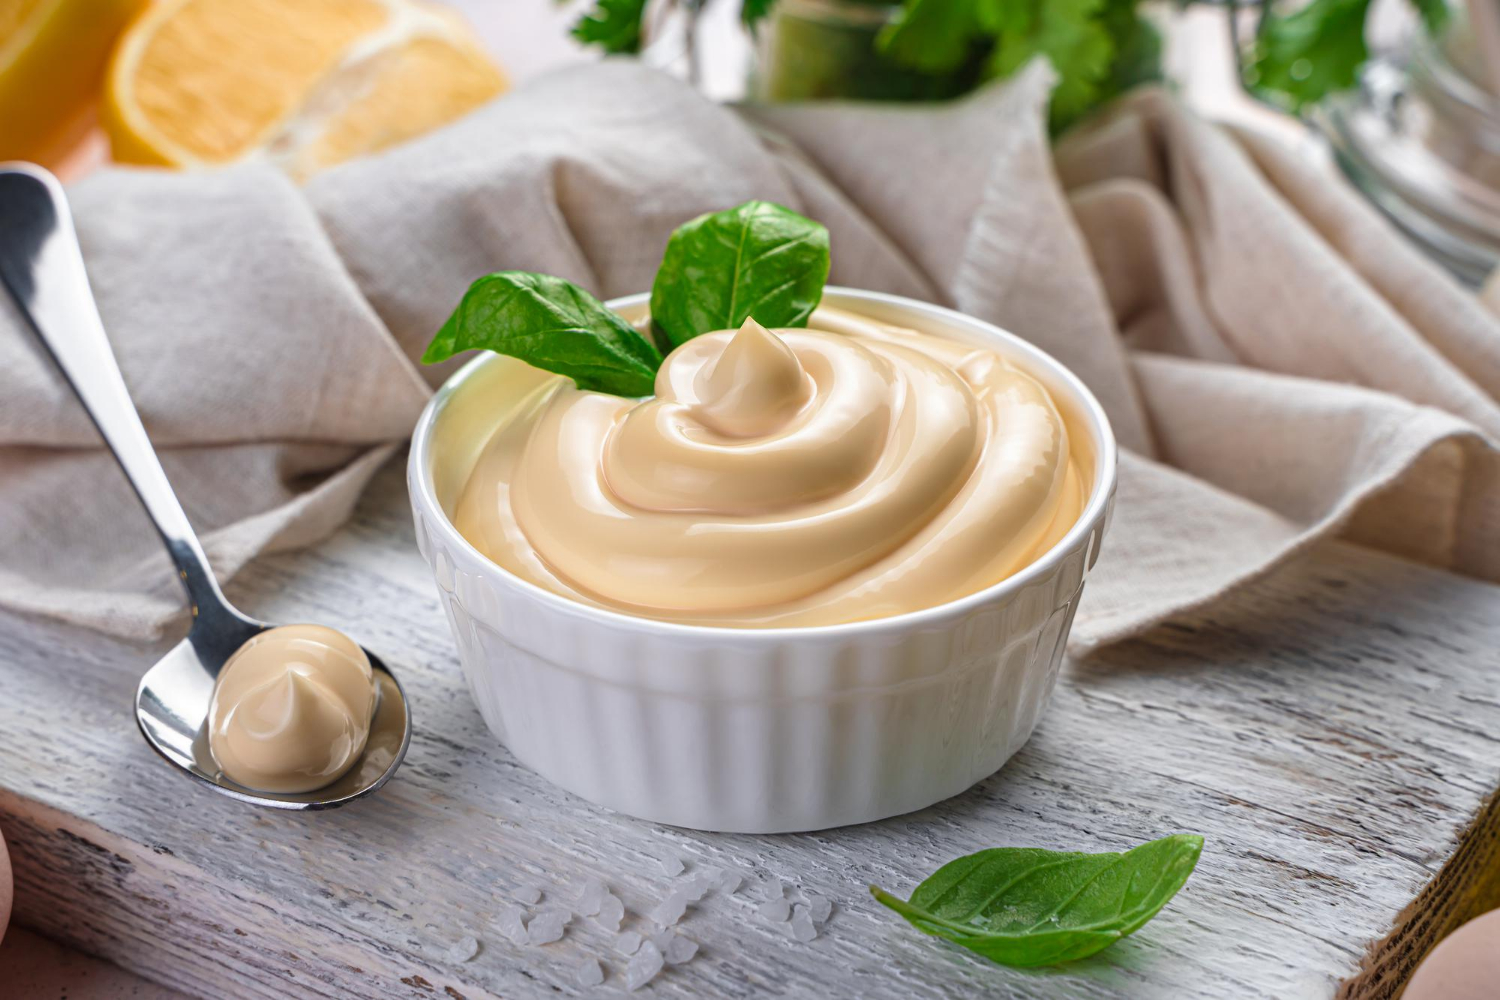 Is Mayo Dairy? Nutrition & Safety